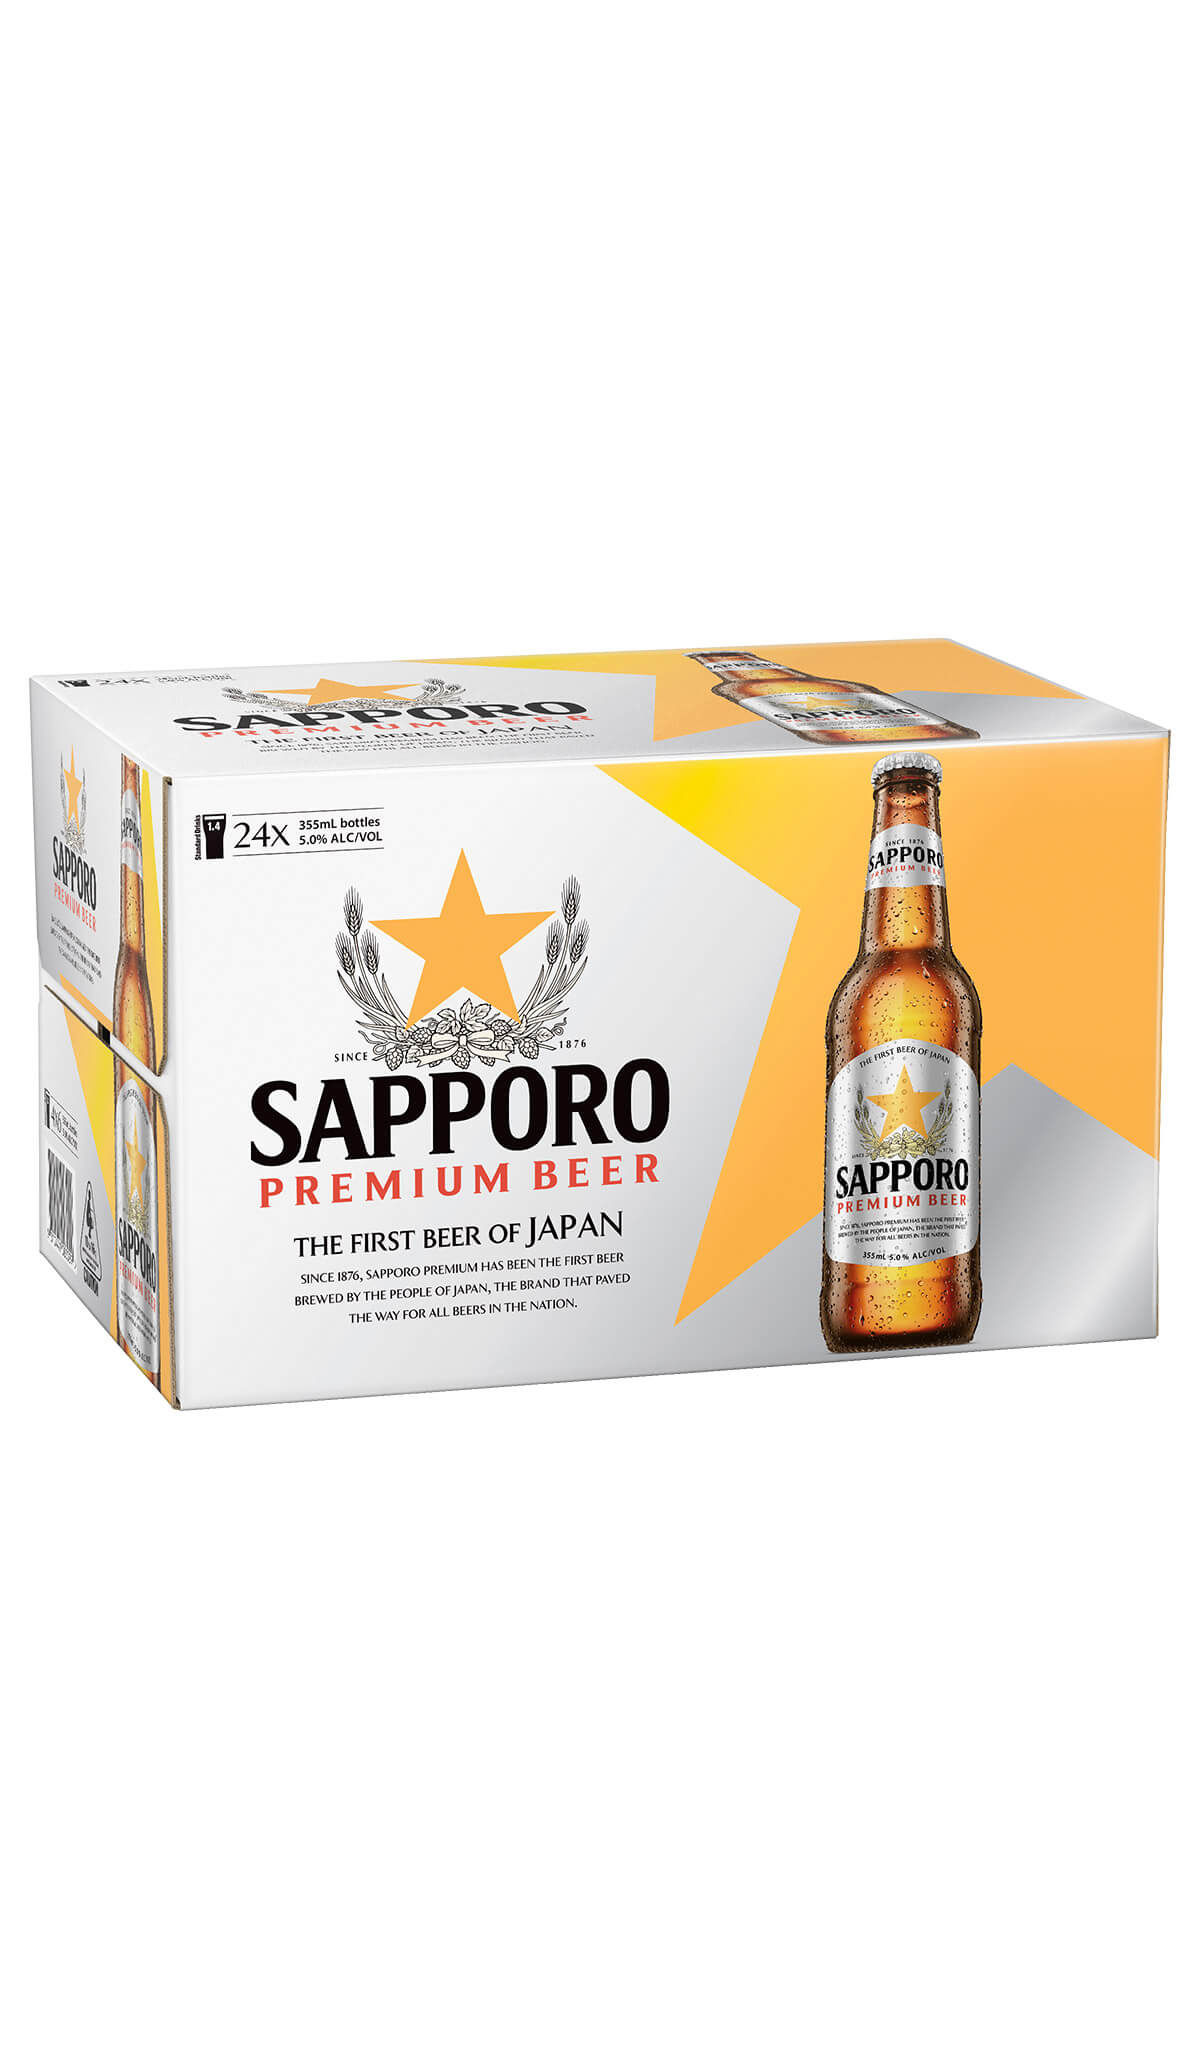 Find out more or buy Sapporo Premium Beer 24x355mL Stubbies Slab online at Wine Sellers Direct - Australia’s independent liquor specialists.